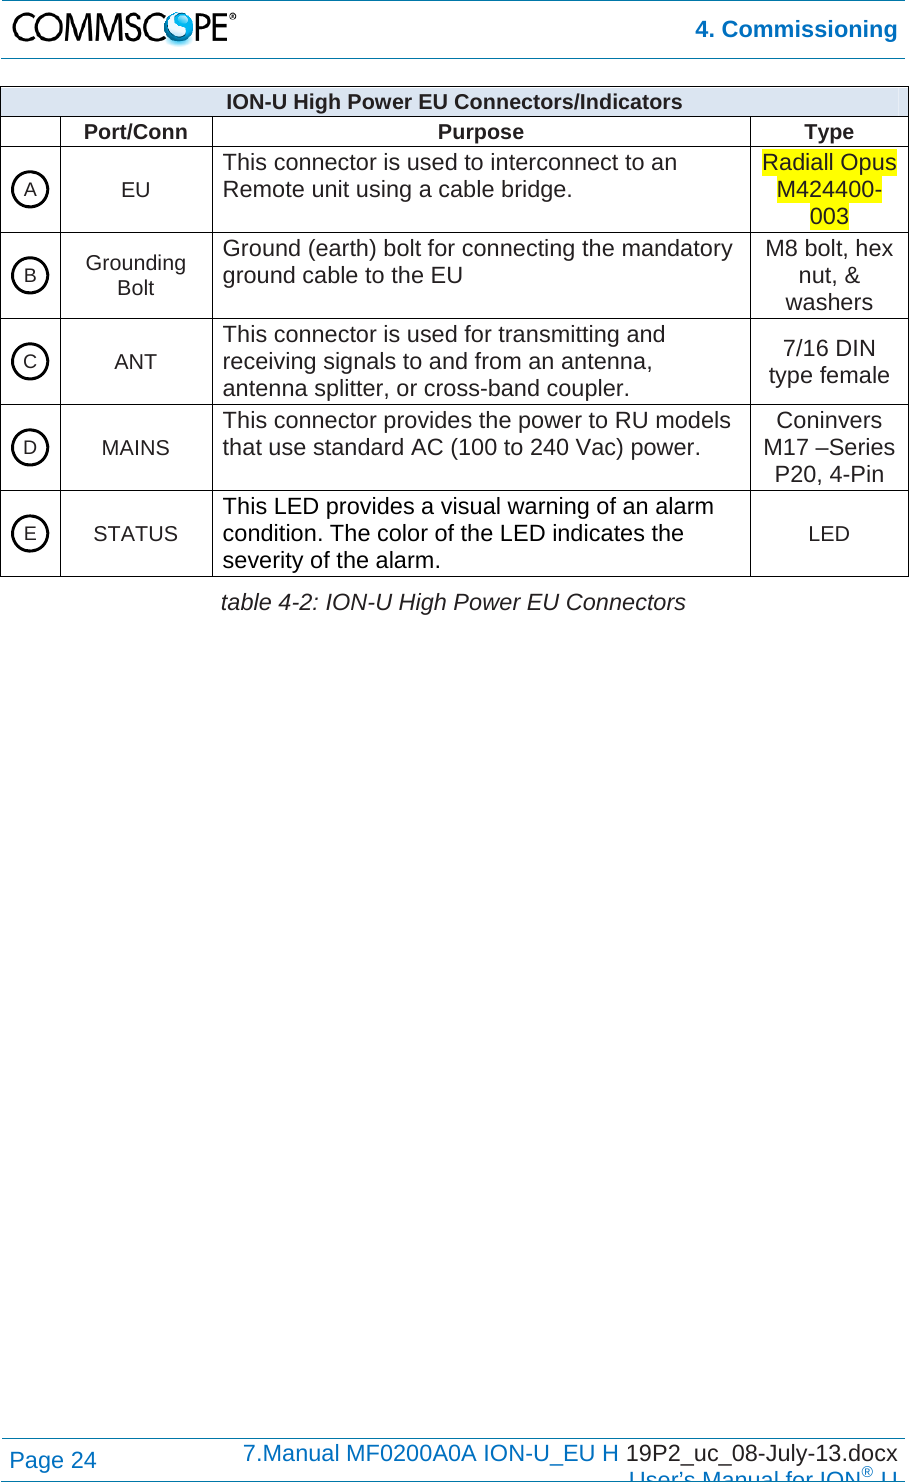  4. Commissioning Page 24  7.Manual MF0200A0A ION-U_EU H 19P2_uc_08-July-13.docx  User’s Manual for ION®U ION-U High Power EU Connectors/Indicators  Port/Conn  Purpose  Type  EU This connector is used to interconnect to an Remote unit using a cable bridge.   Radiall Opus M424400-003  Grounding Bolt Ground (earth) bolt for connecting the mandatory ground cable to the EU  M8 bolt, hex nut, &amp; washers  ANT  This connector is used for transmitting and receiving signals to and from an antenna, antenna splitter, or cross-band coupler. 7/16 DIN type female  MAINS  This connector provides the power to RU models that use standard AC (100 to 240 Vac) power.  Coninvers M17 –Series P20, 4-Pin  STATUS This LED provides a visual warning of an alarm condition. The color of the LED indicates the severity of the alarm. LED table 4-2: ION-U High Power EU Connectors  A B C D E 